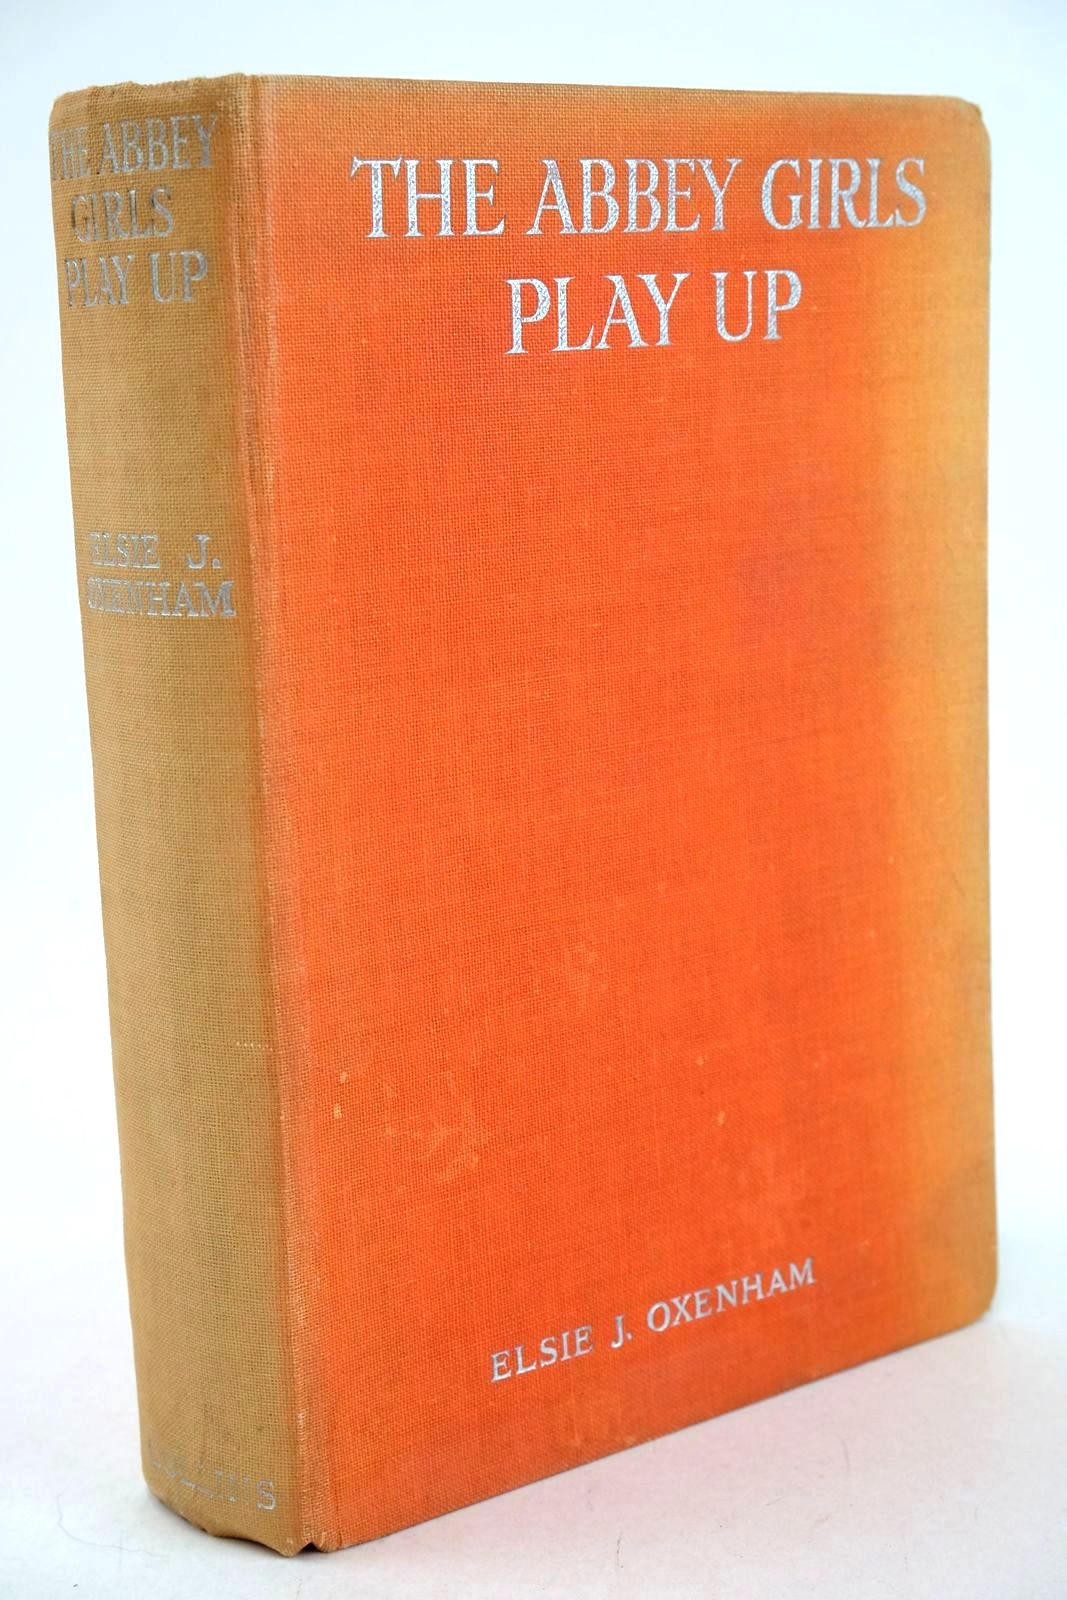 Photo of THE ABBEY GIRLS PLAY UP written by Oxenham, Elsie J. published by Collins Clear-Type Press (STOCK CODE: 1327260)  for sale by Stella & Rose's Books